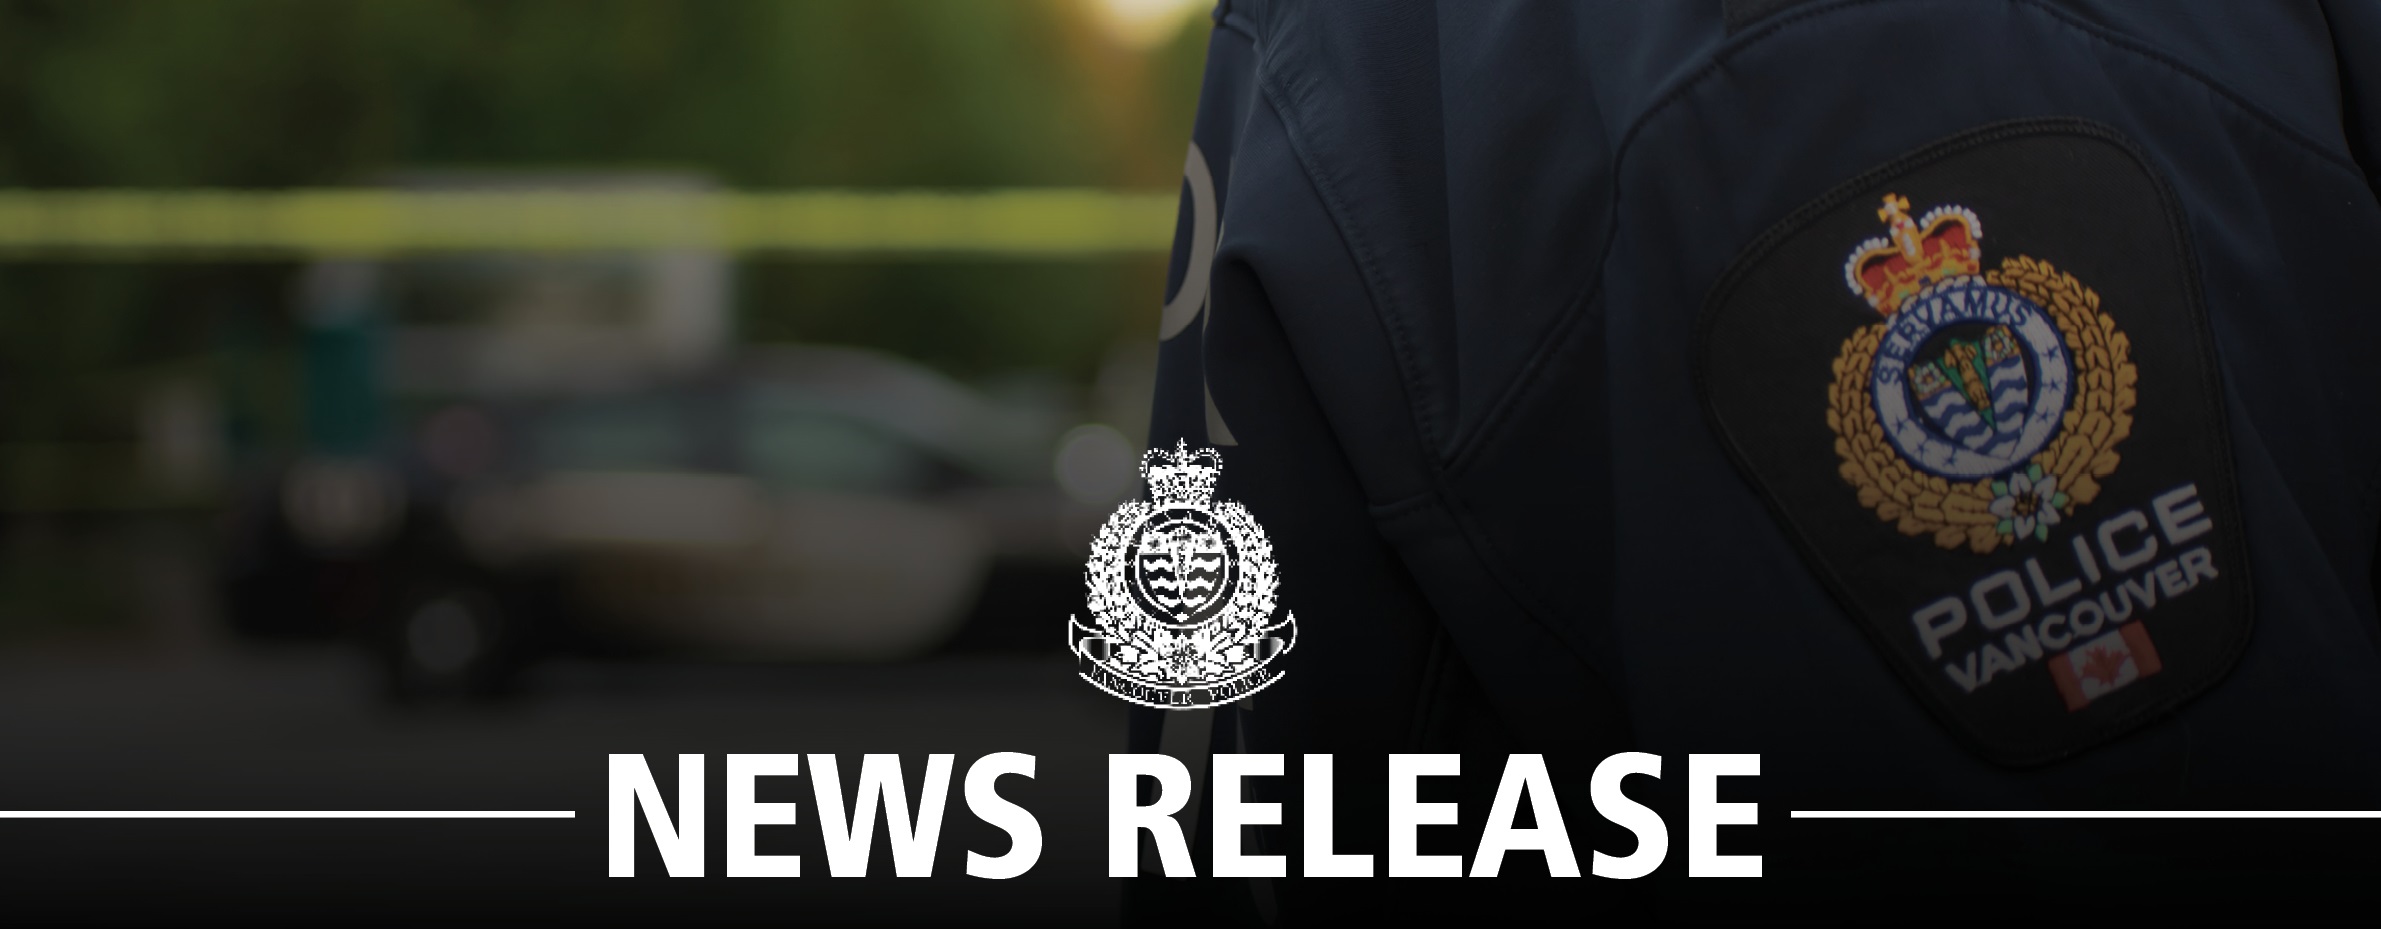 70-year-old man assaulted on Granville Street, 34-year-old suspect charged